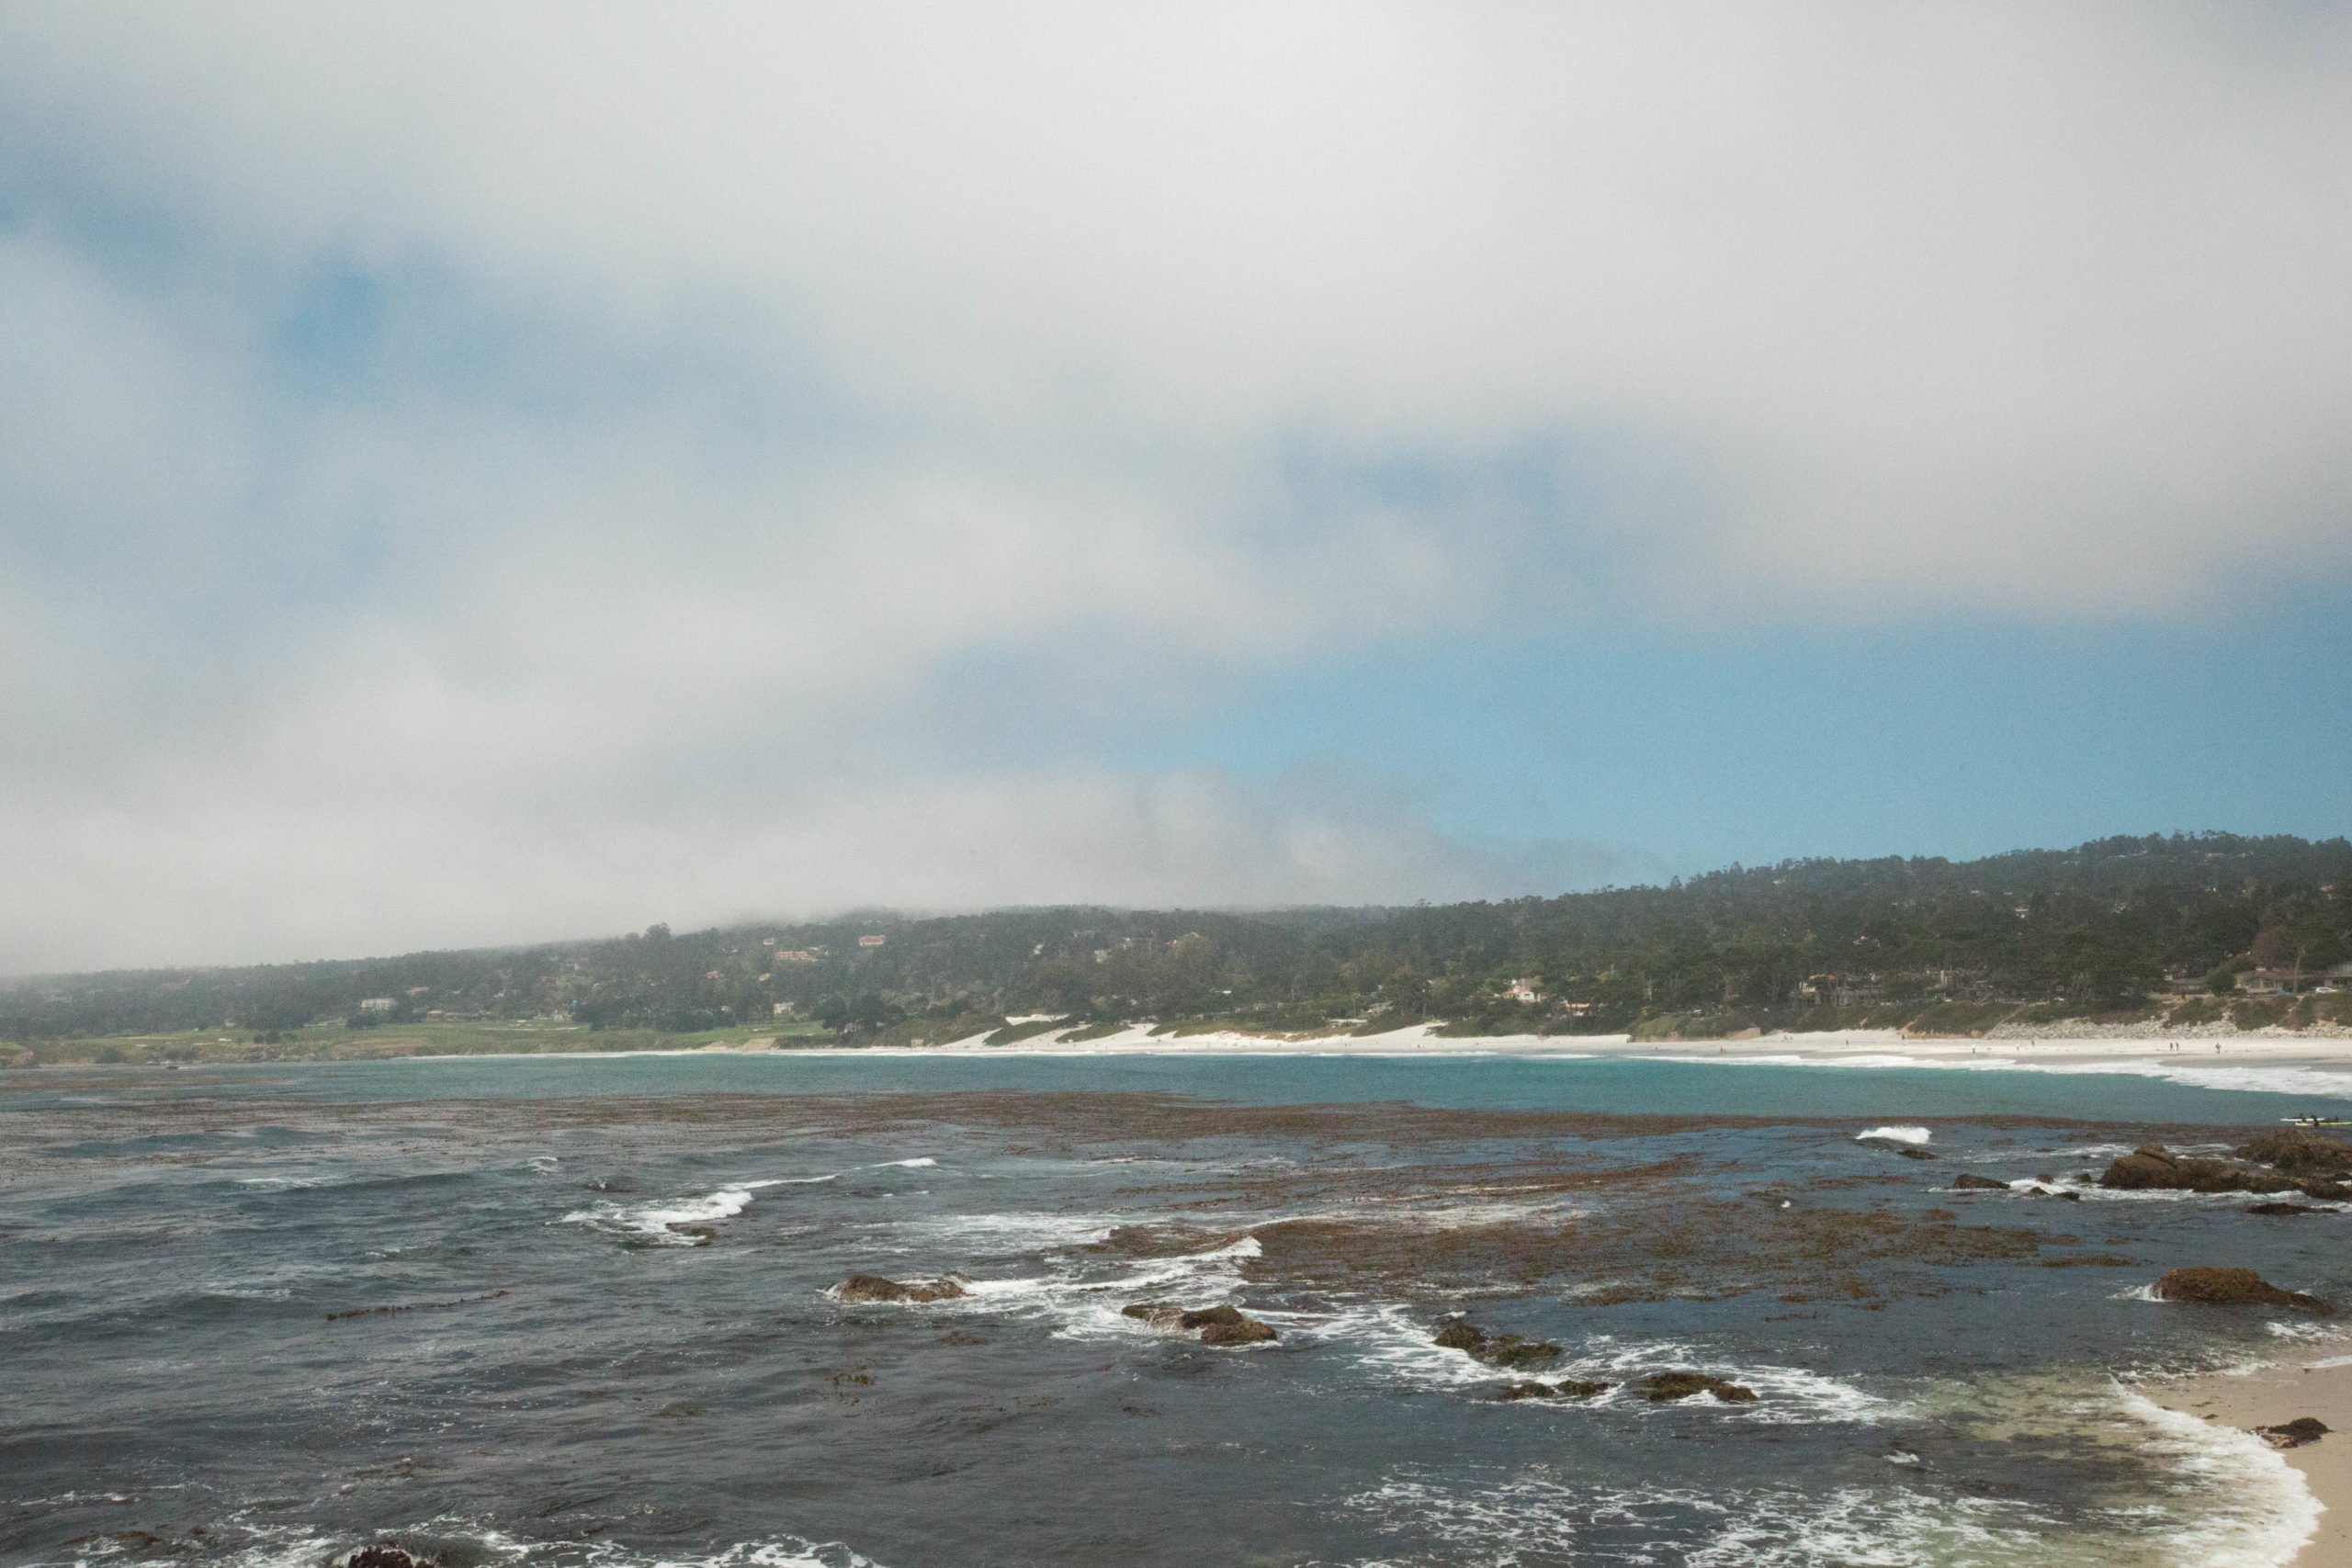 Detour in Carmel-by-the-sea